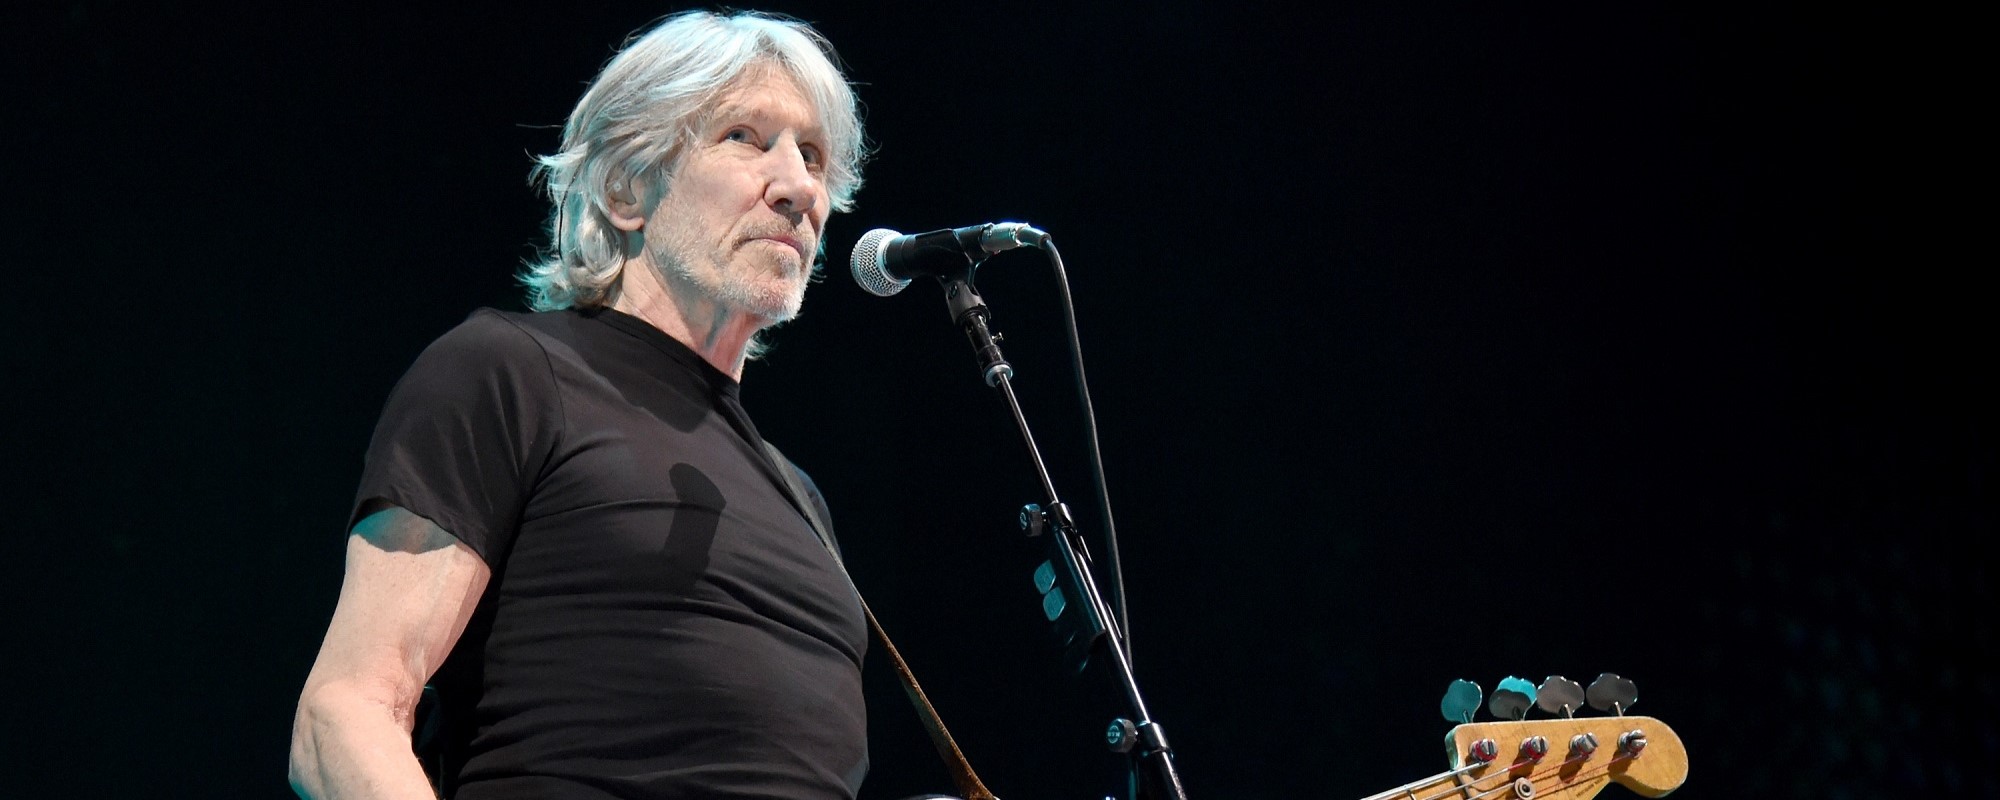 Roger Waters Dedicates Heartfelt Performance of Pink Floyds Wish You Were Here to Palestine [Video]